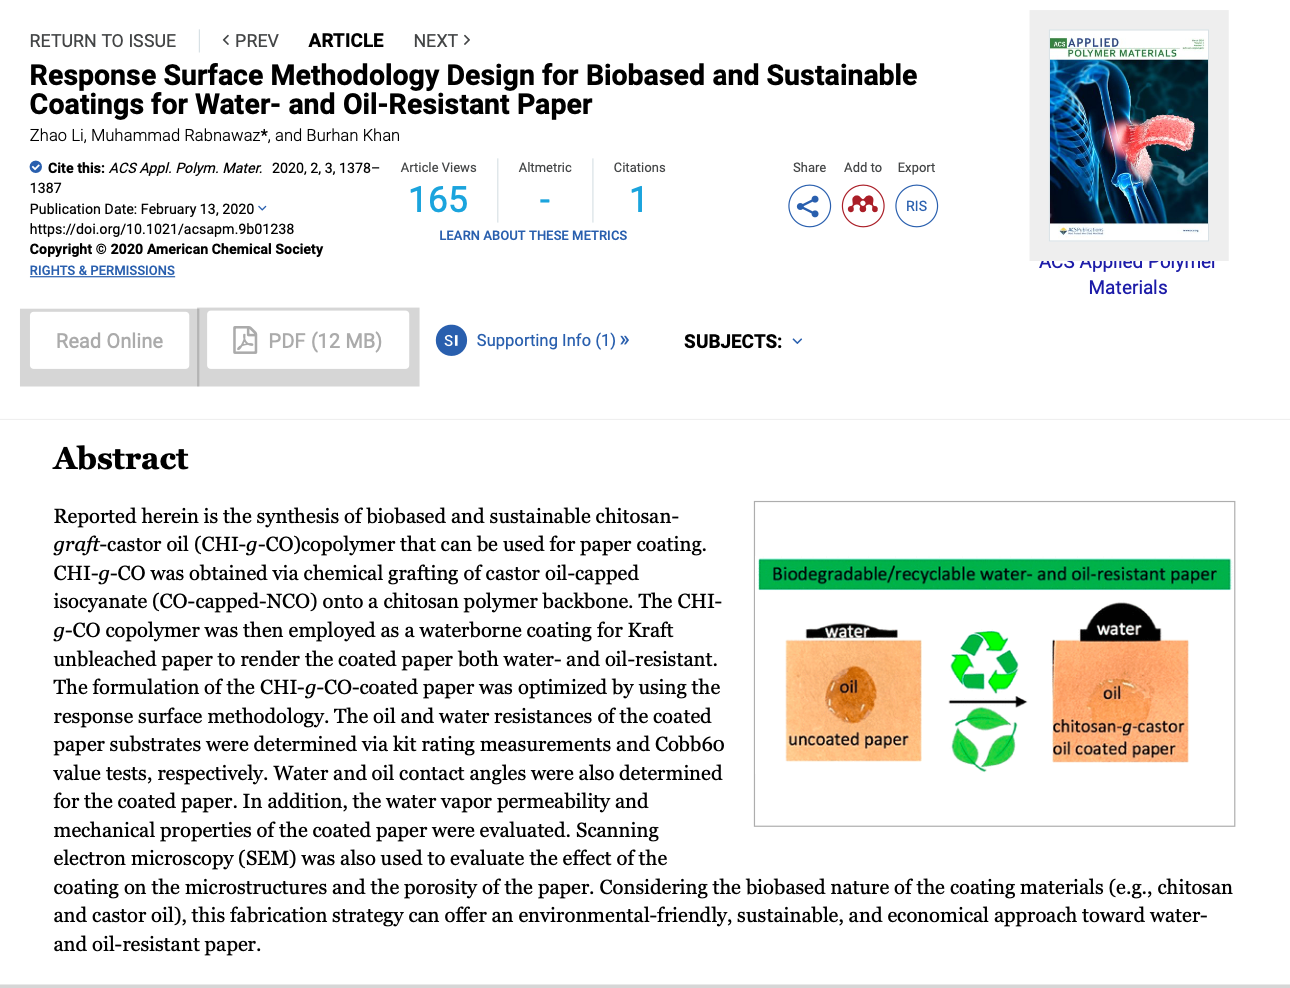 Response Surface Methodology Design for Biobased and Sustainable Coatings for Water- and Oil-Resistant Paper